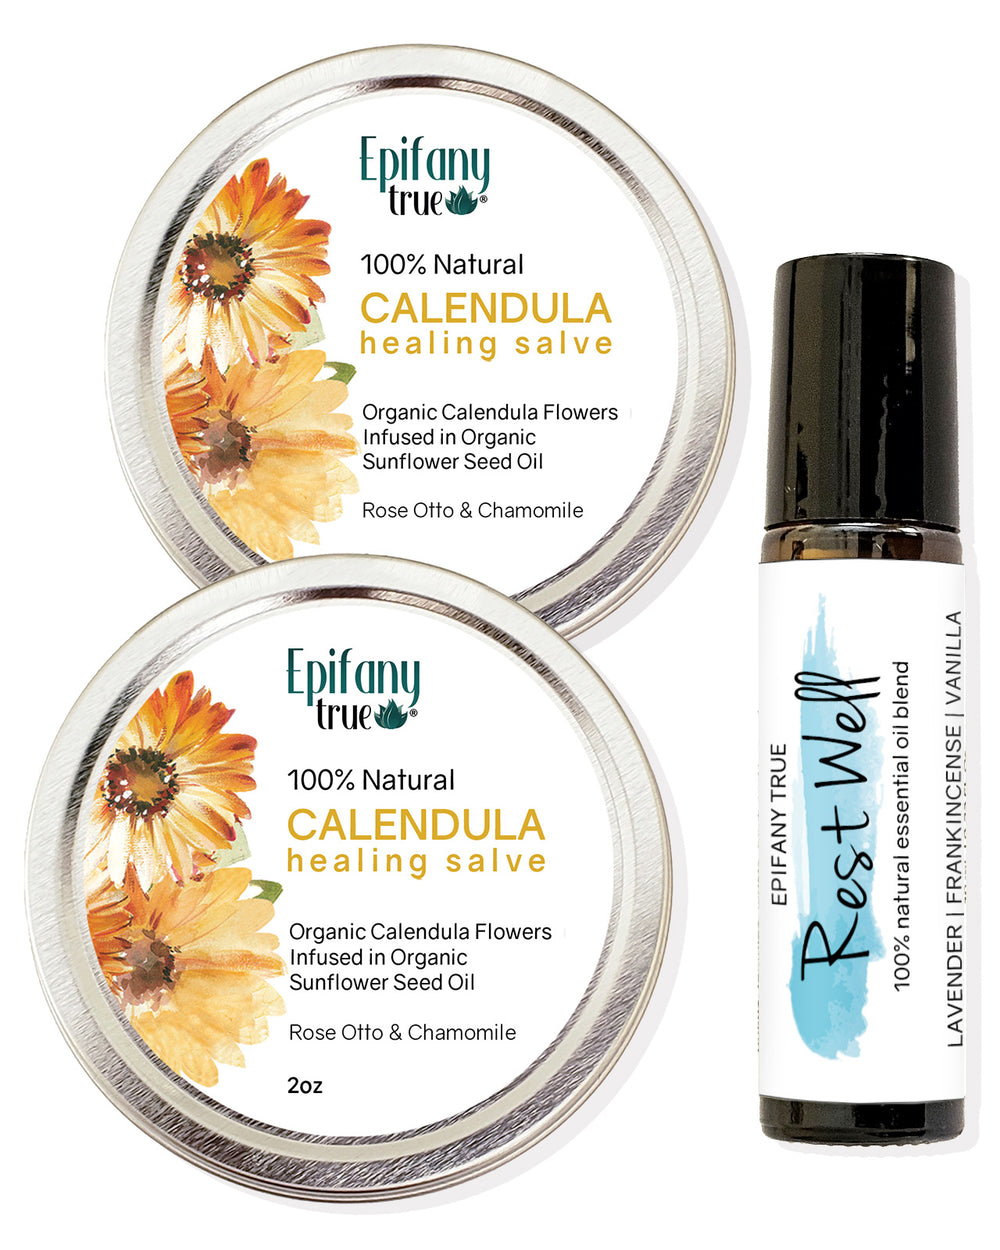 100% Natural Healing Calendula Salve 2oz and Rest Well Essential Oil Roll-on 0.33oz 3-Piece Gift Set